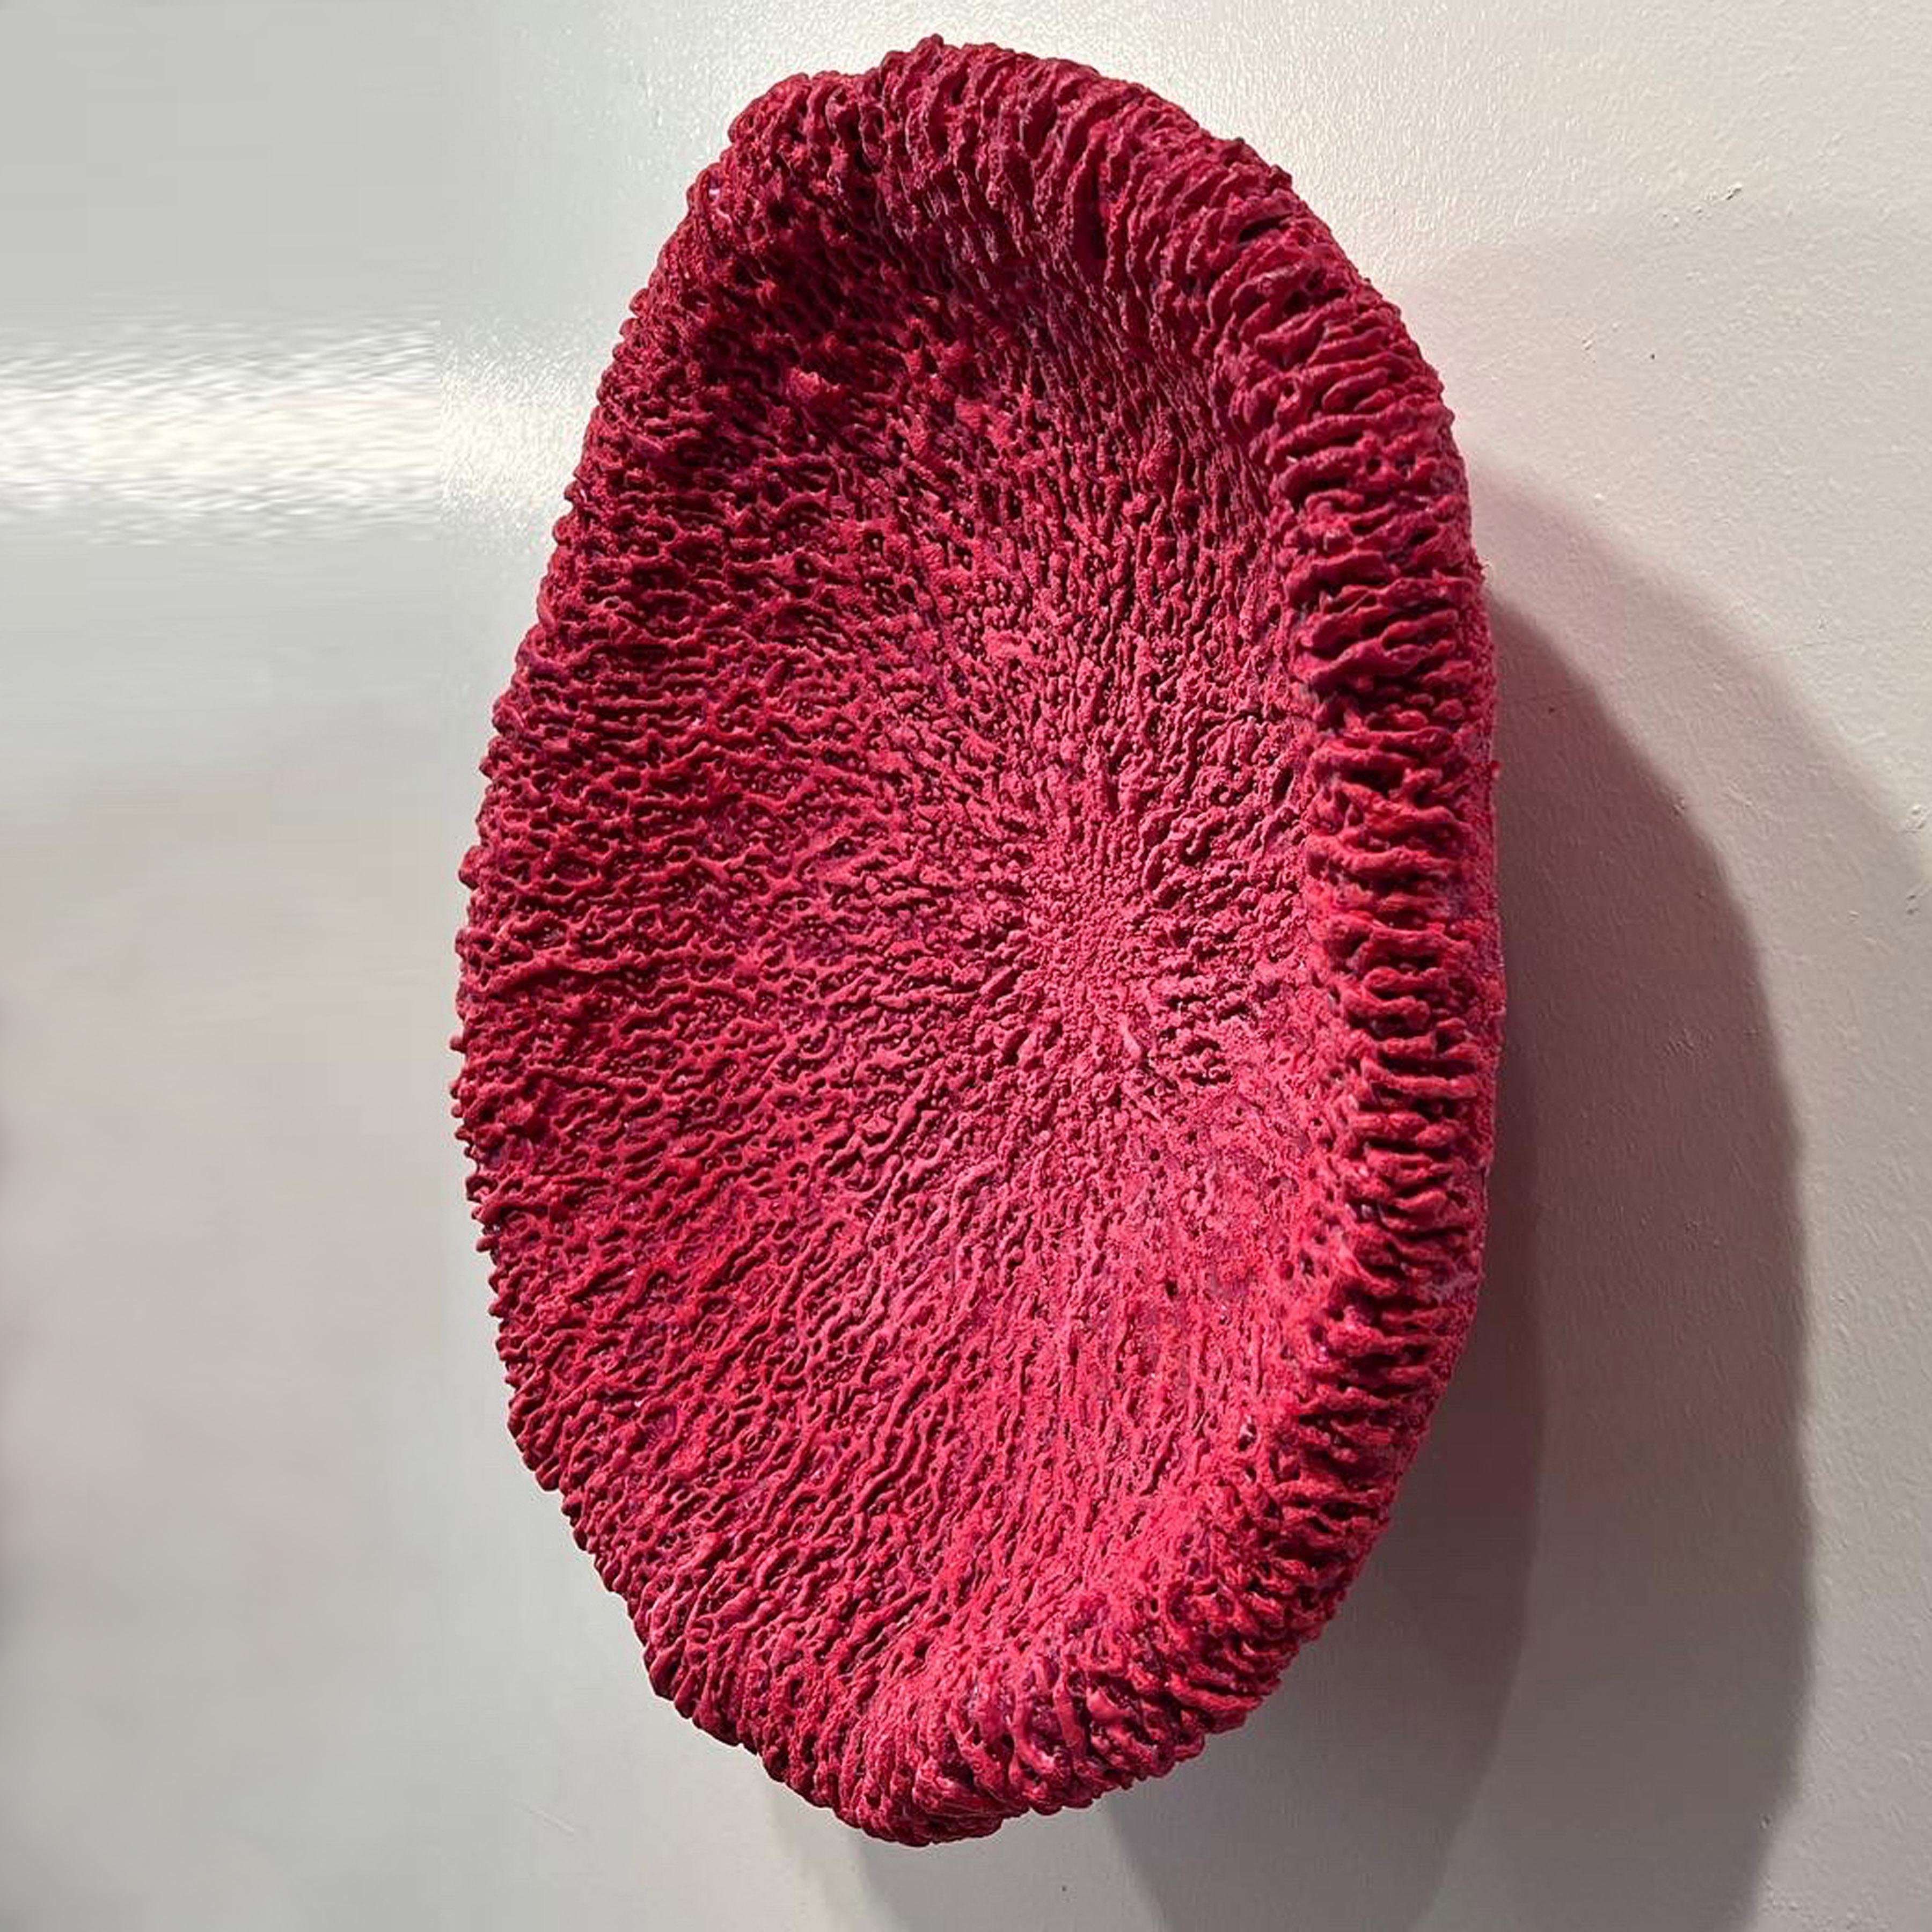 This minimalist dark pink 3D wall piece is by Barry Katz. He creates pieces that allude to the artist looking into a mirror. And in particular, one which reflects inner states. Not a mirror that flatters, far from, but one that tells inescapable